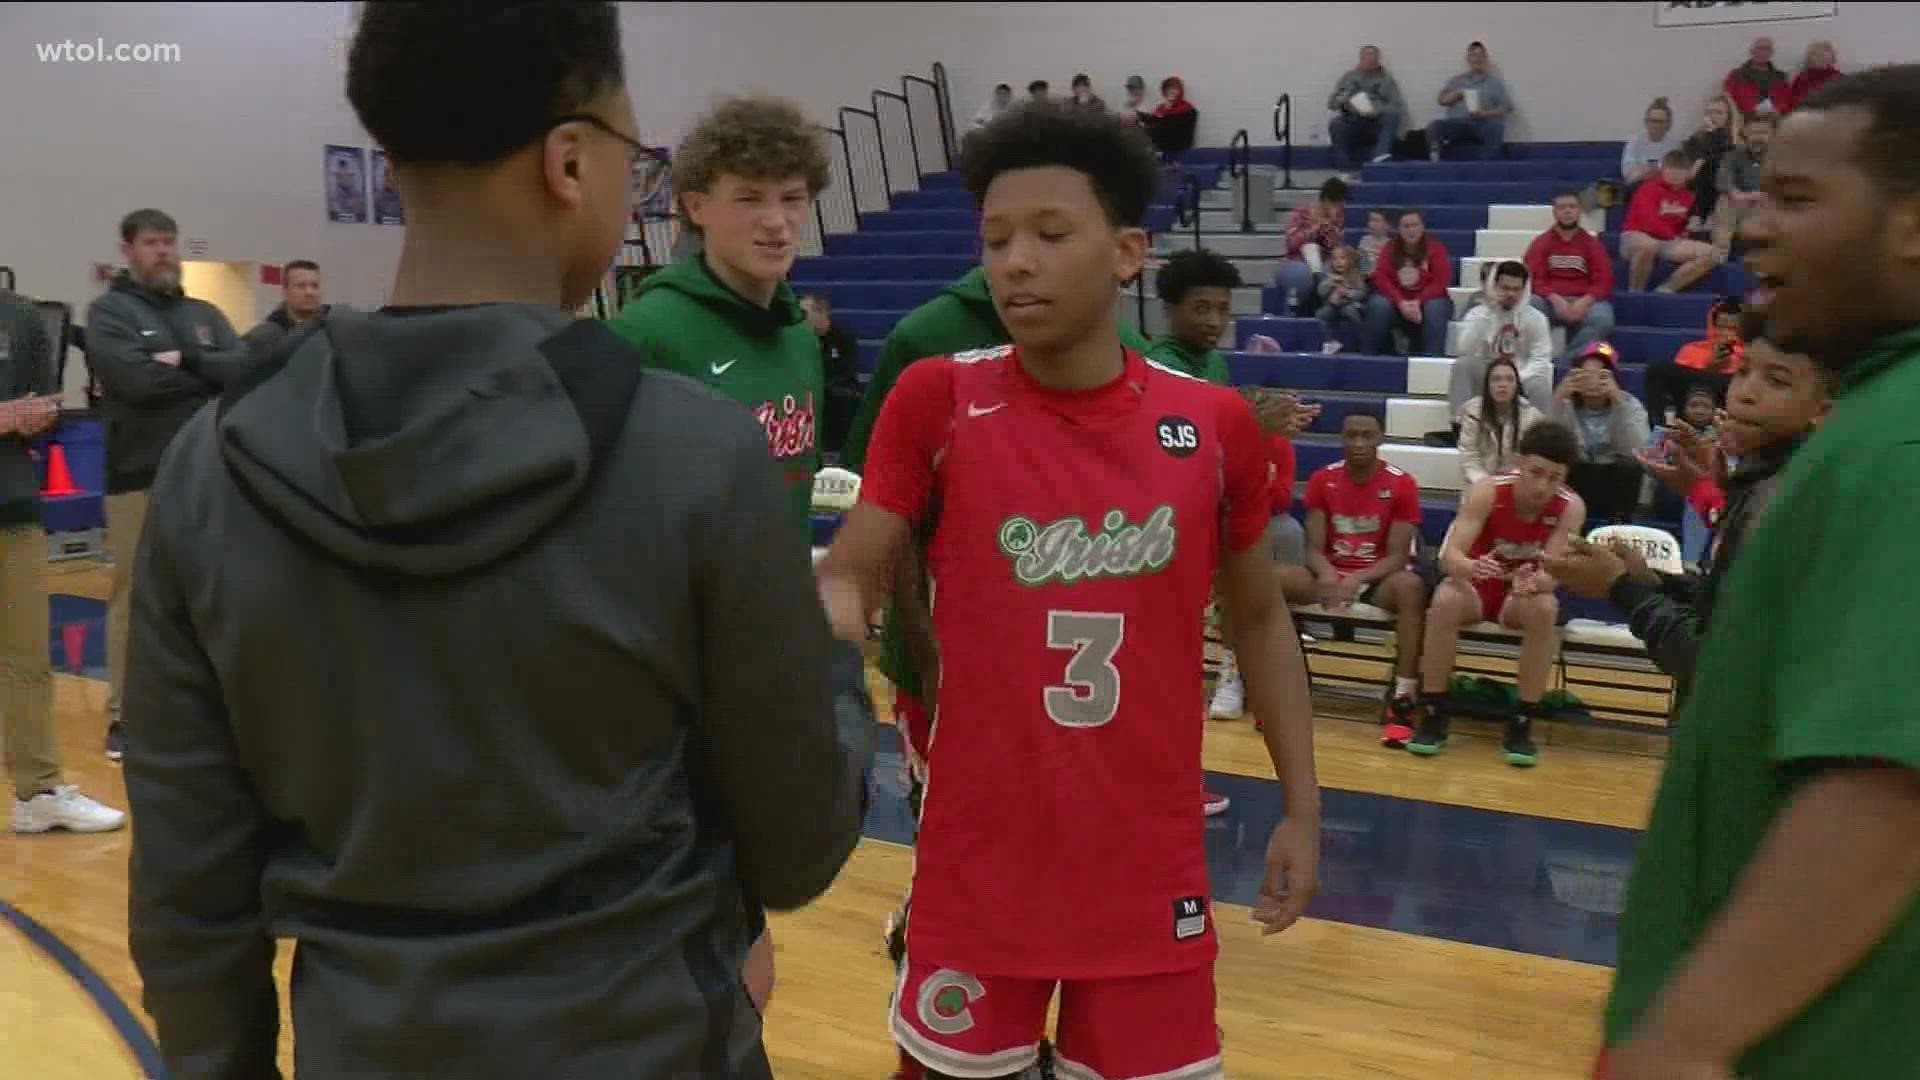 The Irish, Tornadoes and Wildcats all advanced in the boys state tournament. The Titans moved on to the regional final in the girls state tournament.